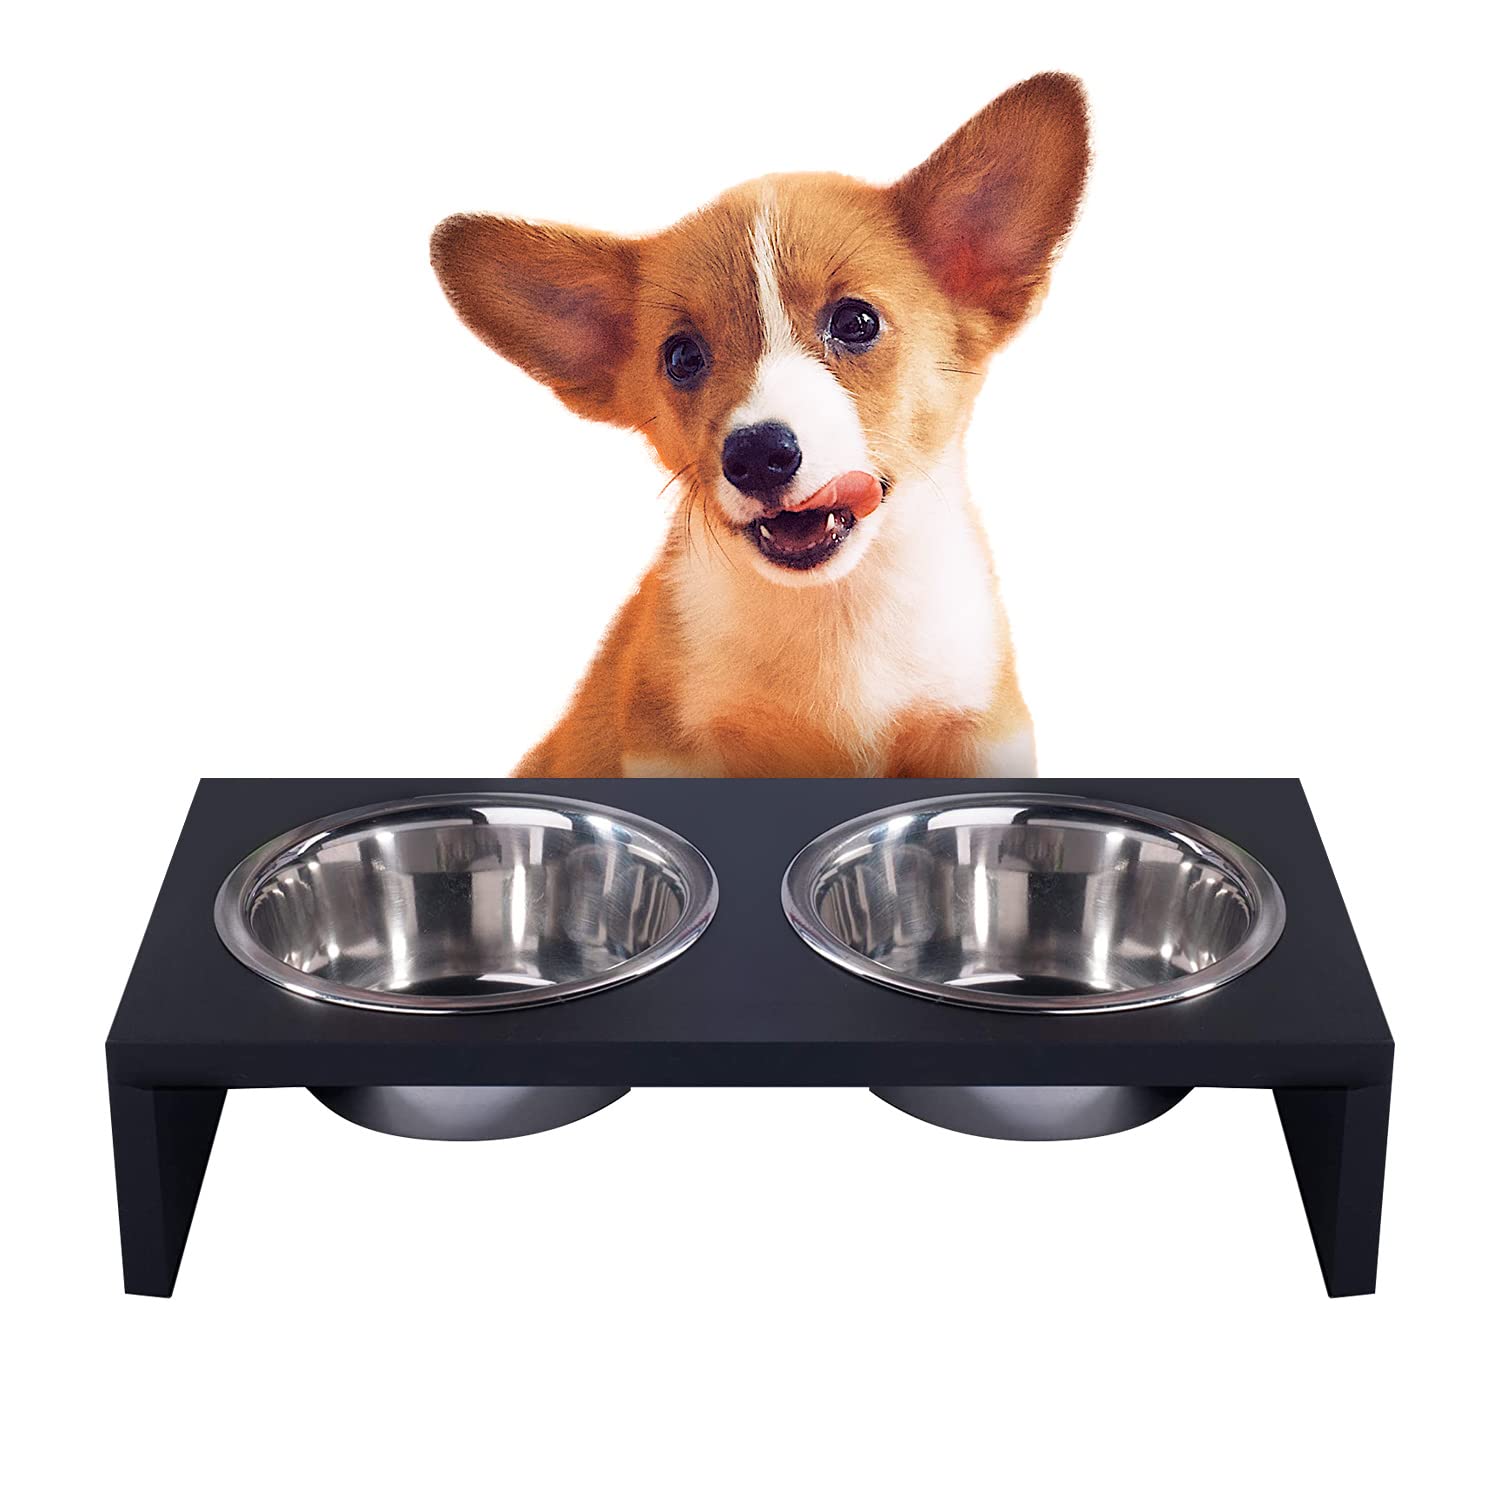 Dog Bowl Stand, Cat Food Stand, Elevated Pet Feeder, Personalized Dog Bowl,  2 Bowl Feeder, Raised Wooden Dog Bowl, Double Dog Bowl Holder 